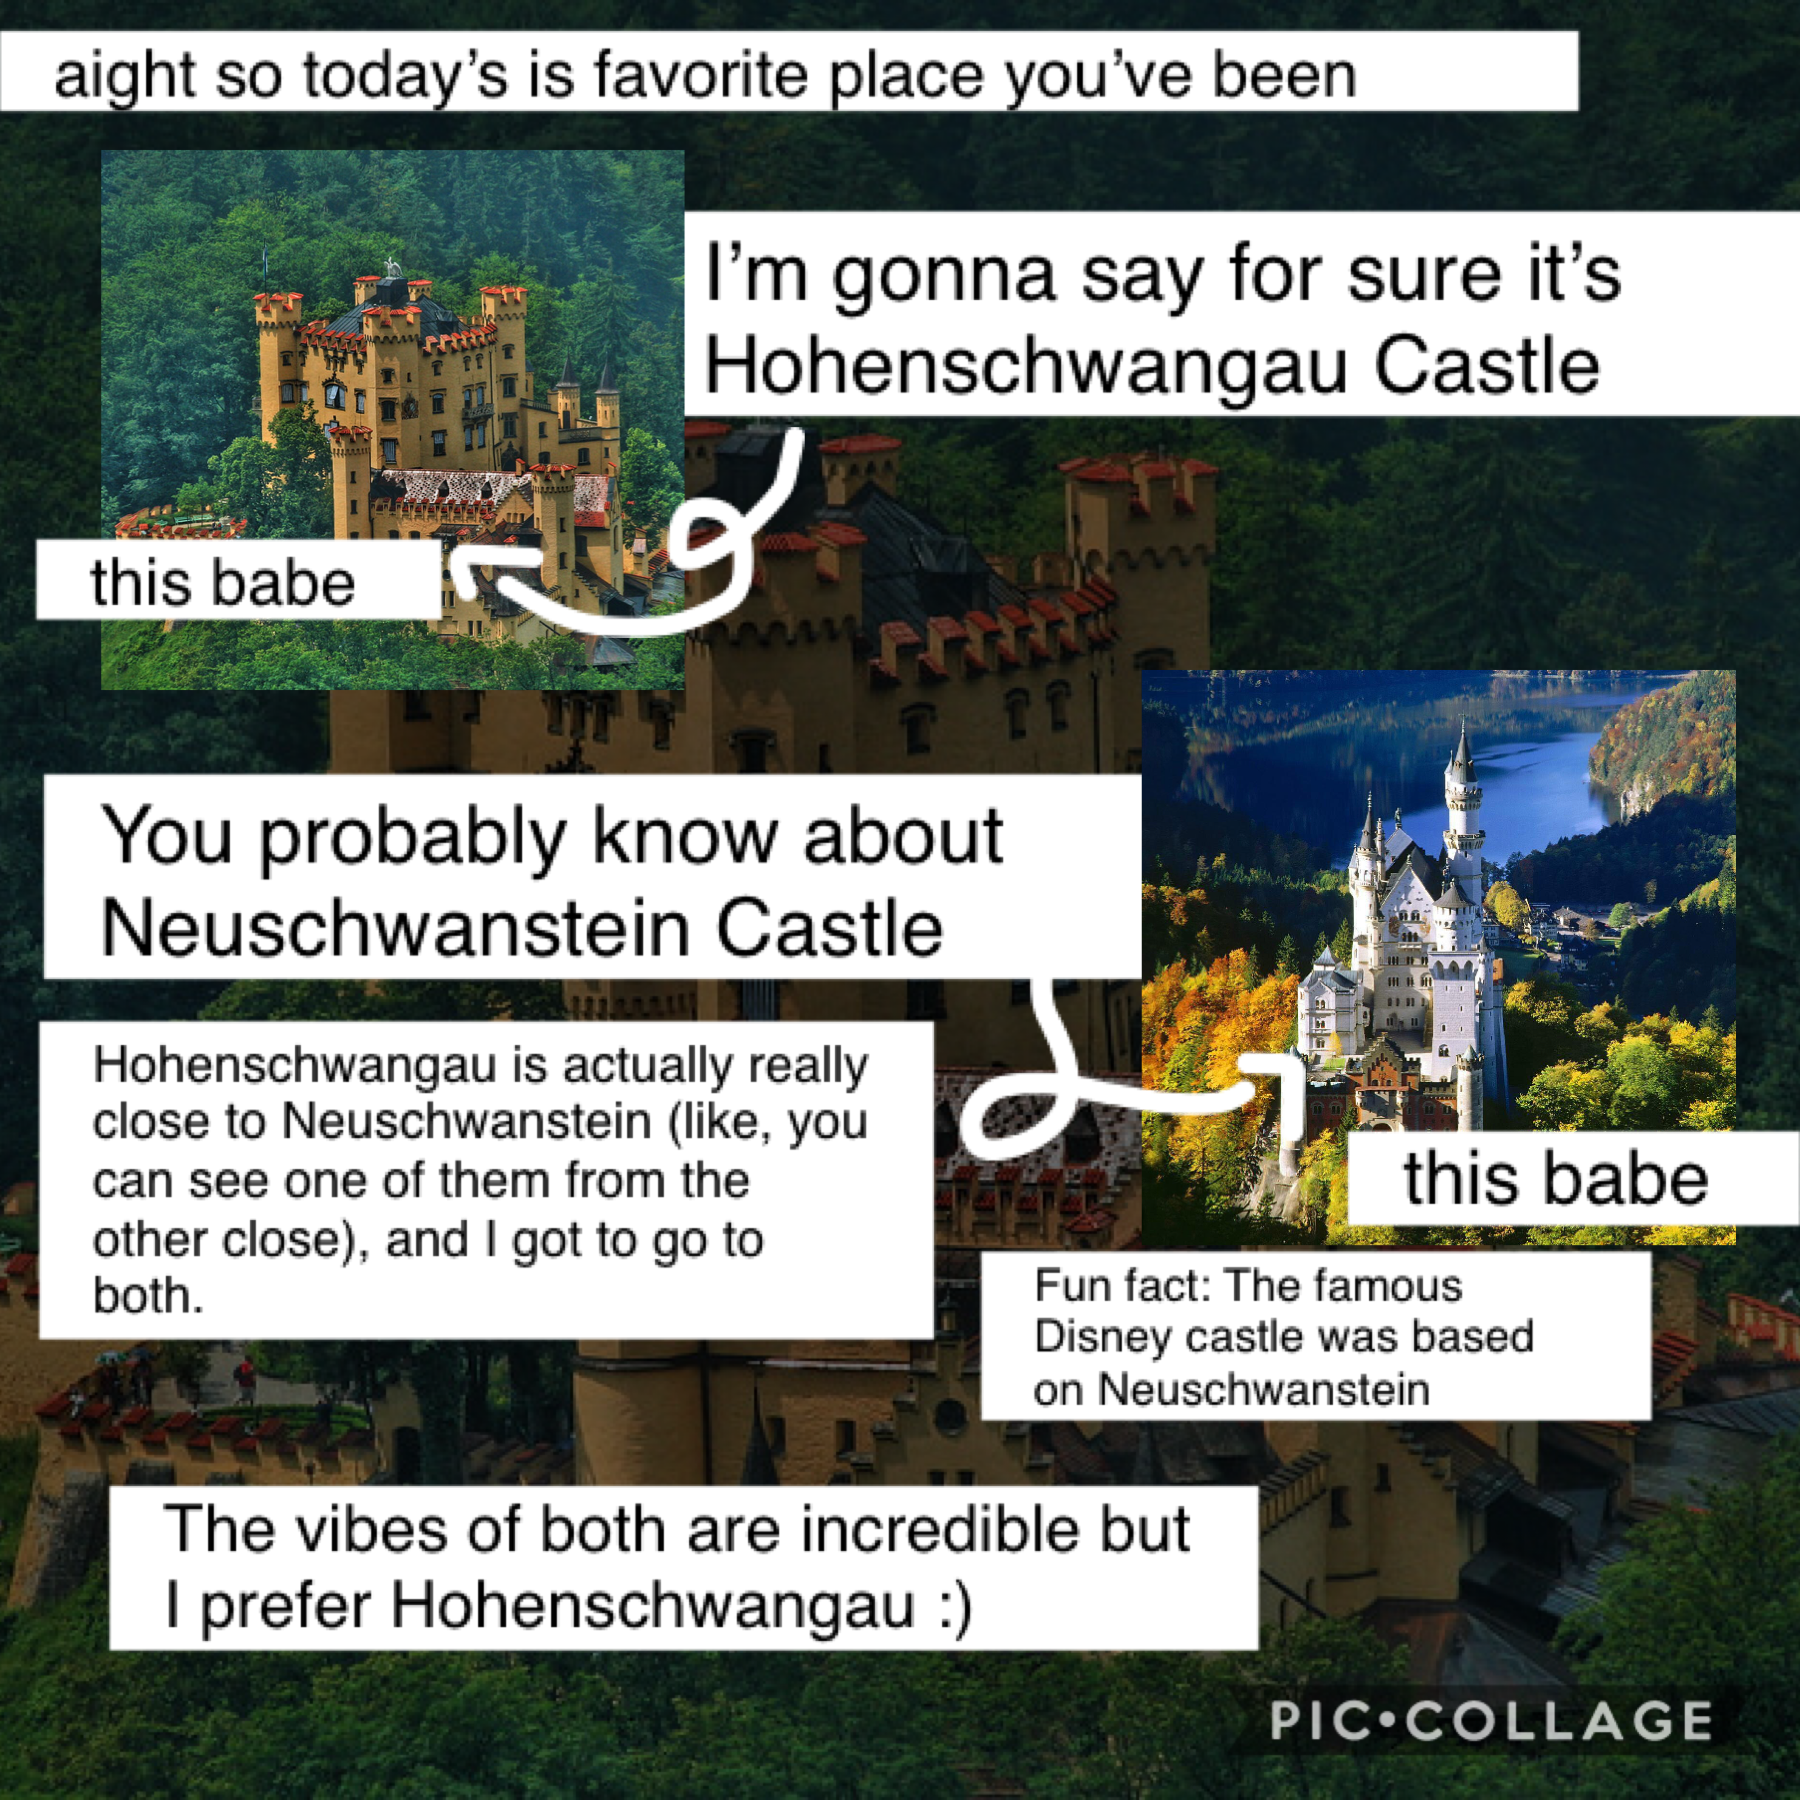 Me, ranting about the vibes of German castles at 1:30 am

Yeah I should probably sleep now 
Hm